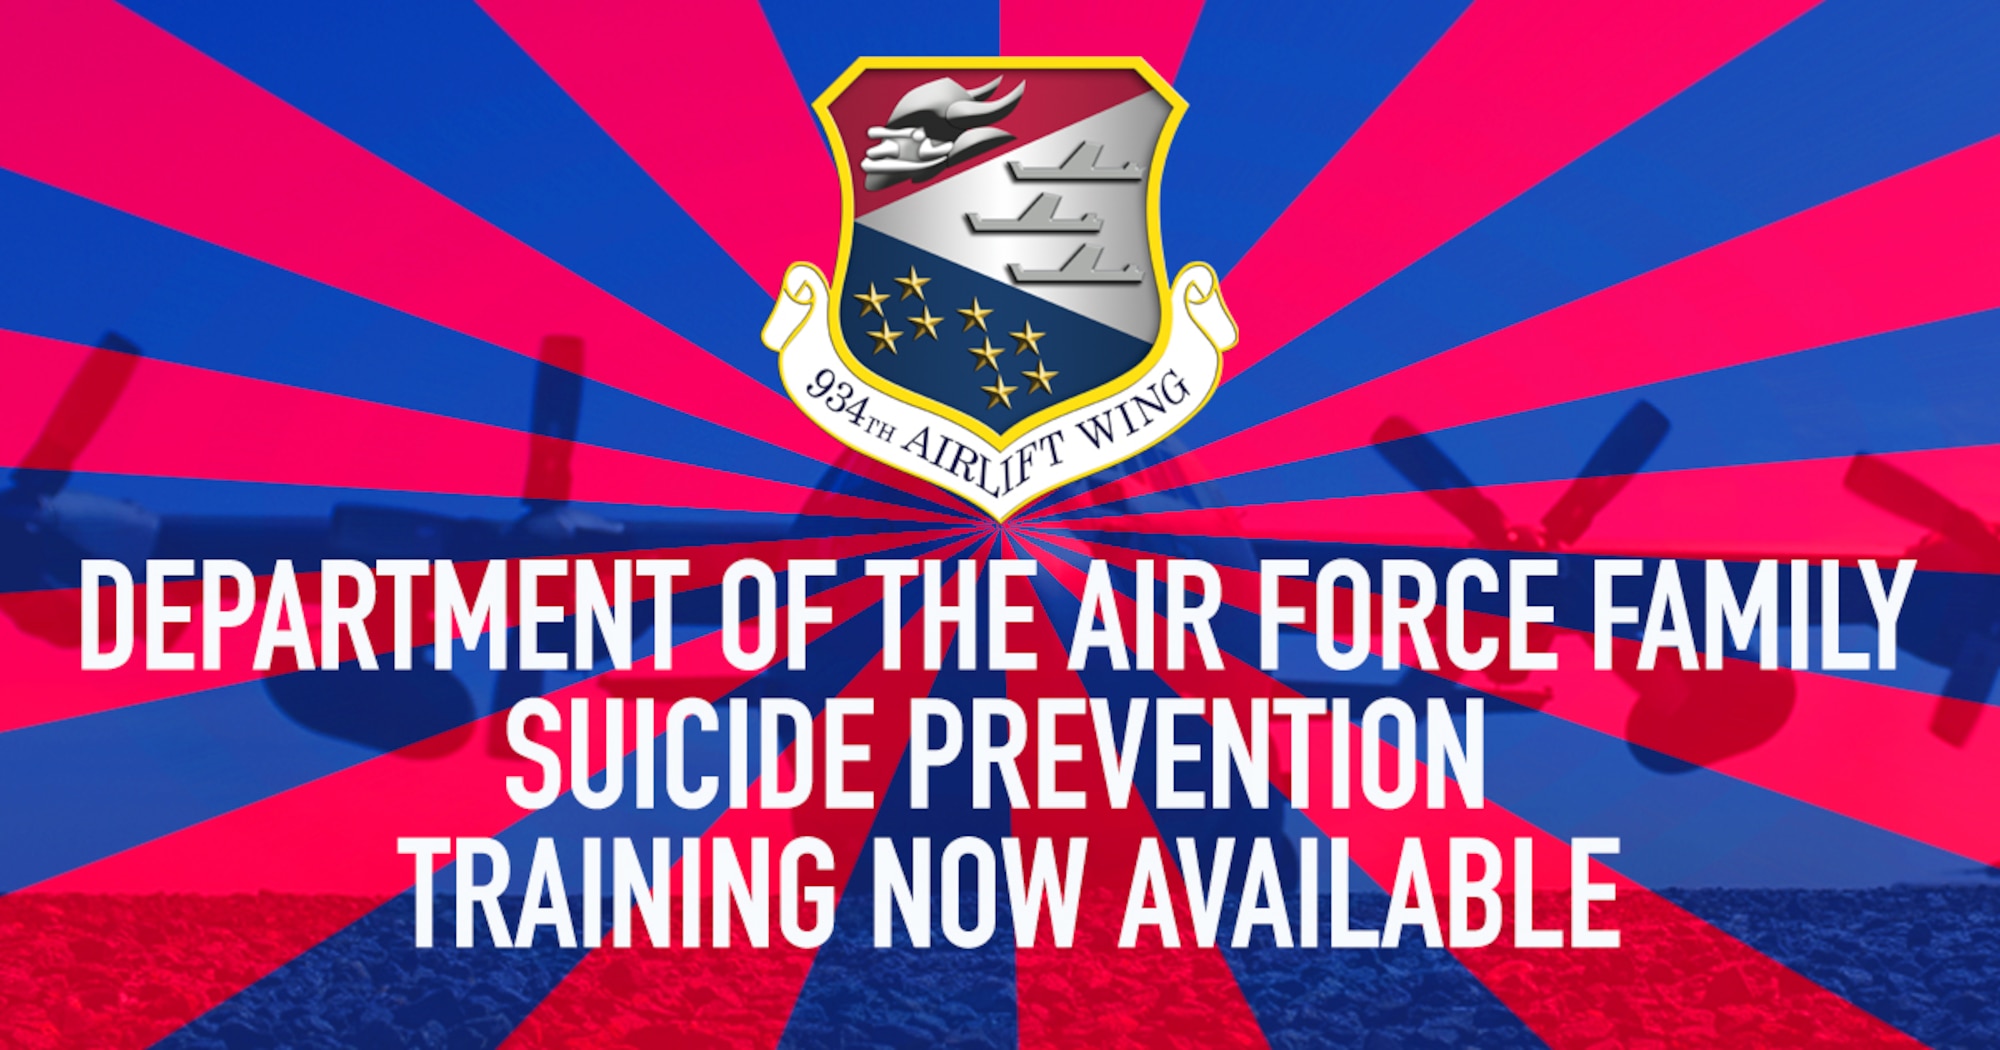 (U.S. Air Force Graphic)